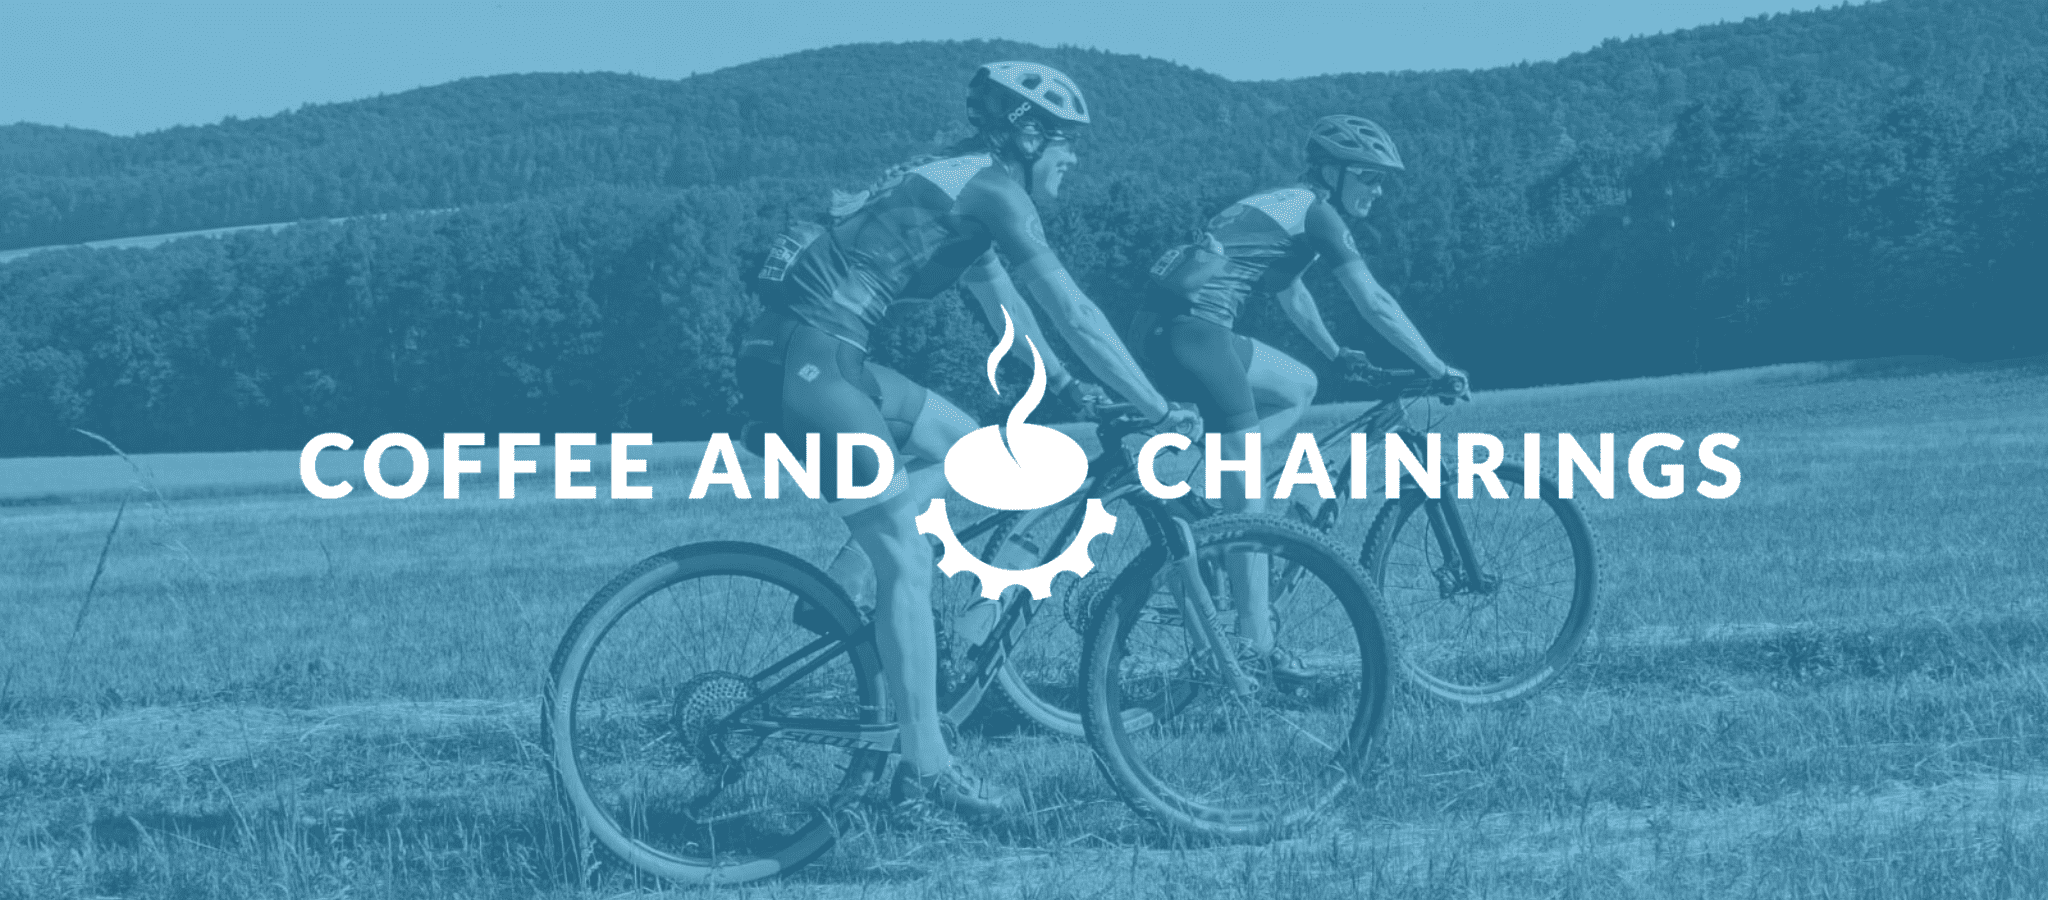 (c) Coffee-and-chainrings.de